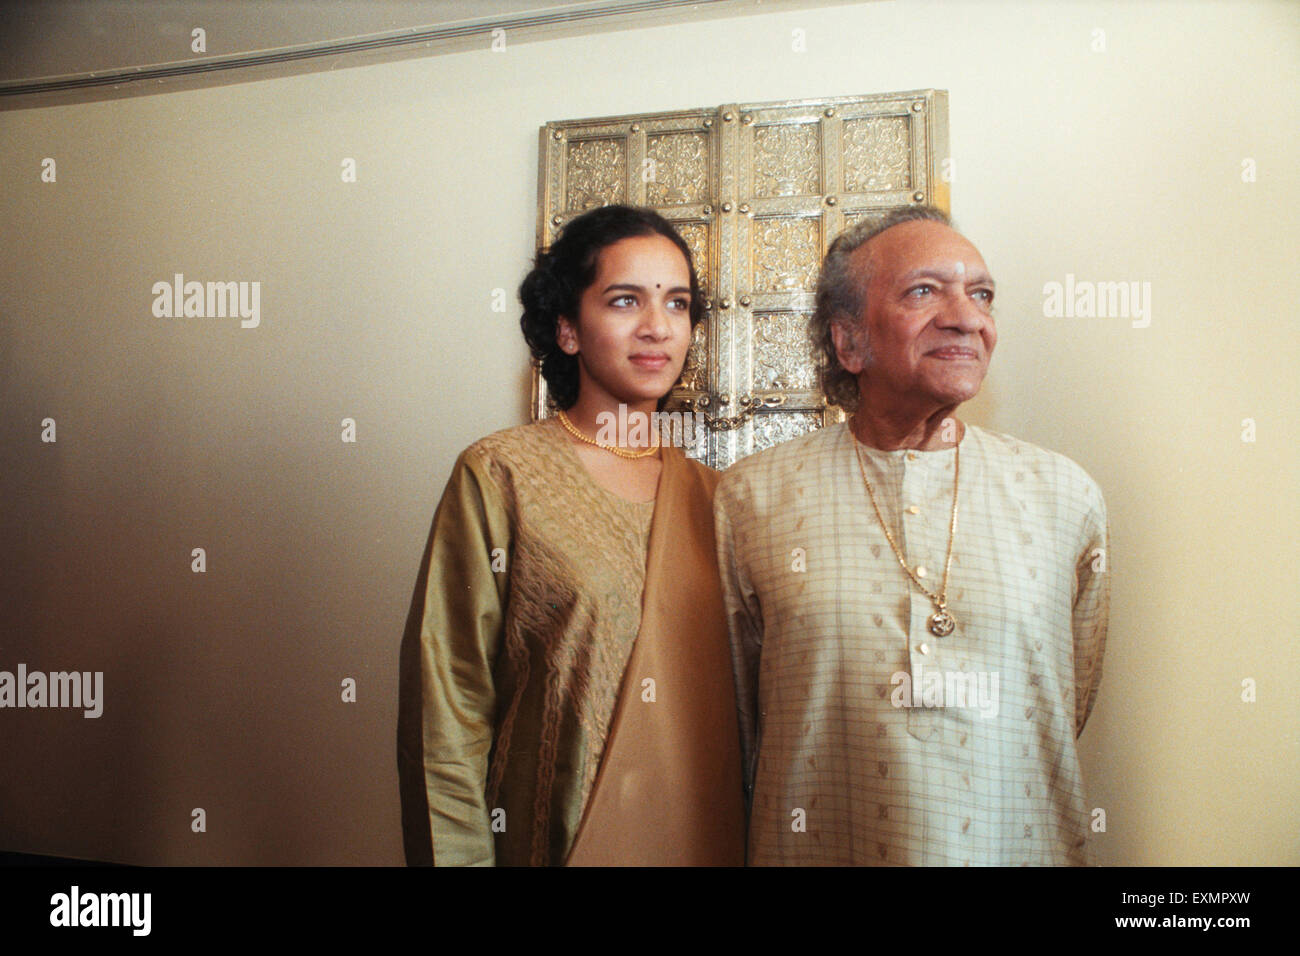 Indian classical music maestro sitar player Pundit Ravi Shankar and daughter Anoushka Shankar is a Indian sitar player and composer. Stock Photo